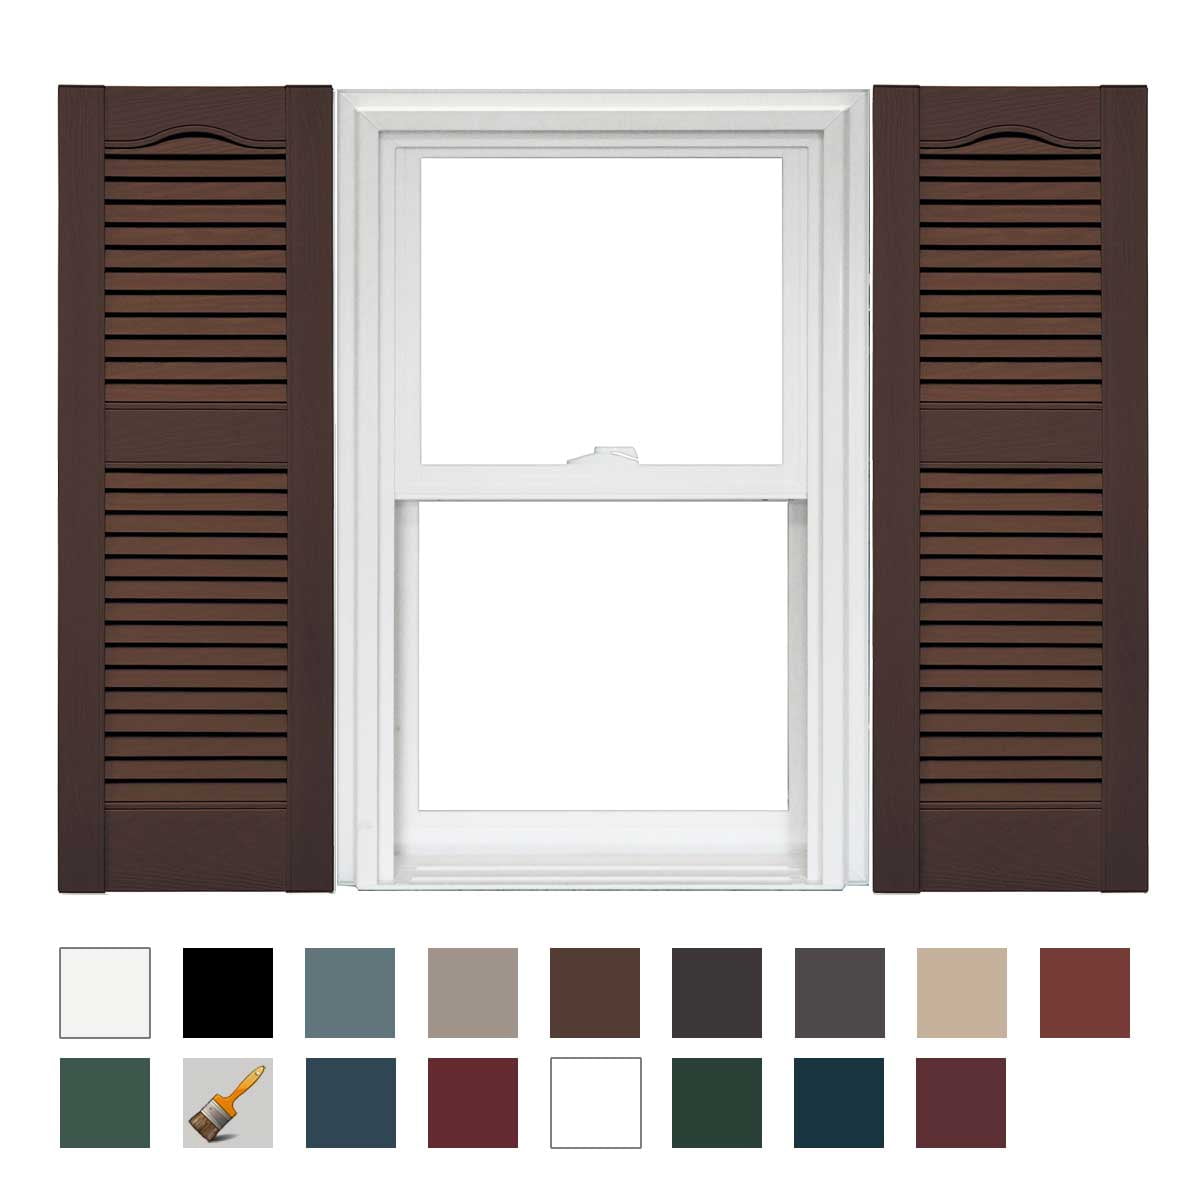 14.5 x 52 009 Federal Brown 1 Pair Mid America Open Louver Vinyl Shutters